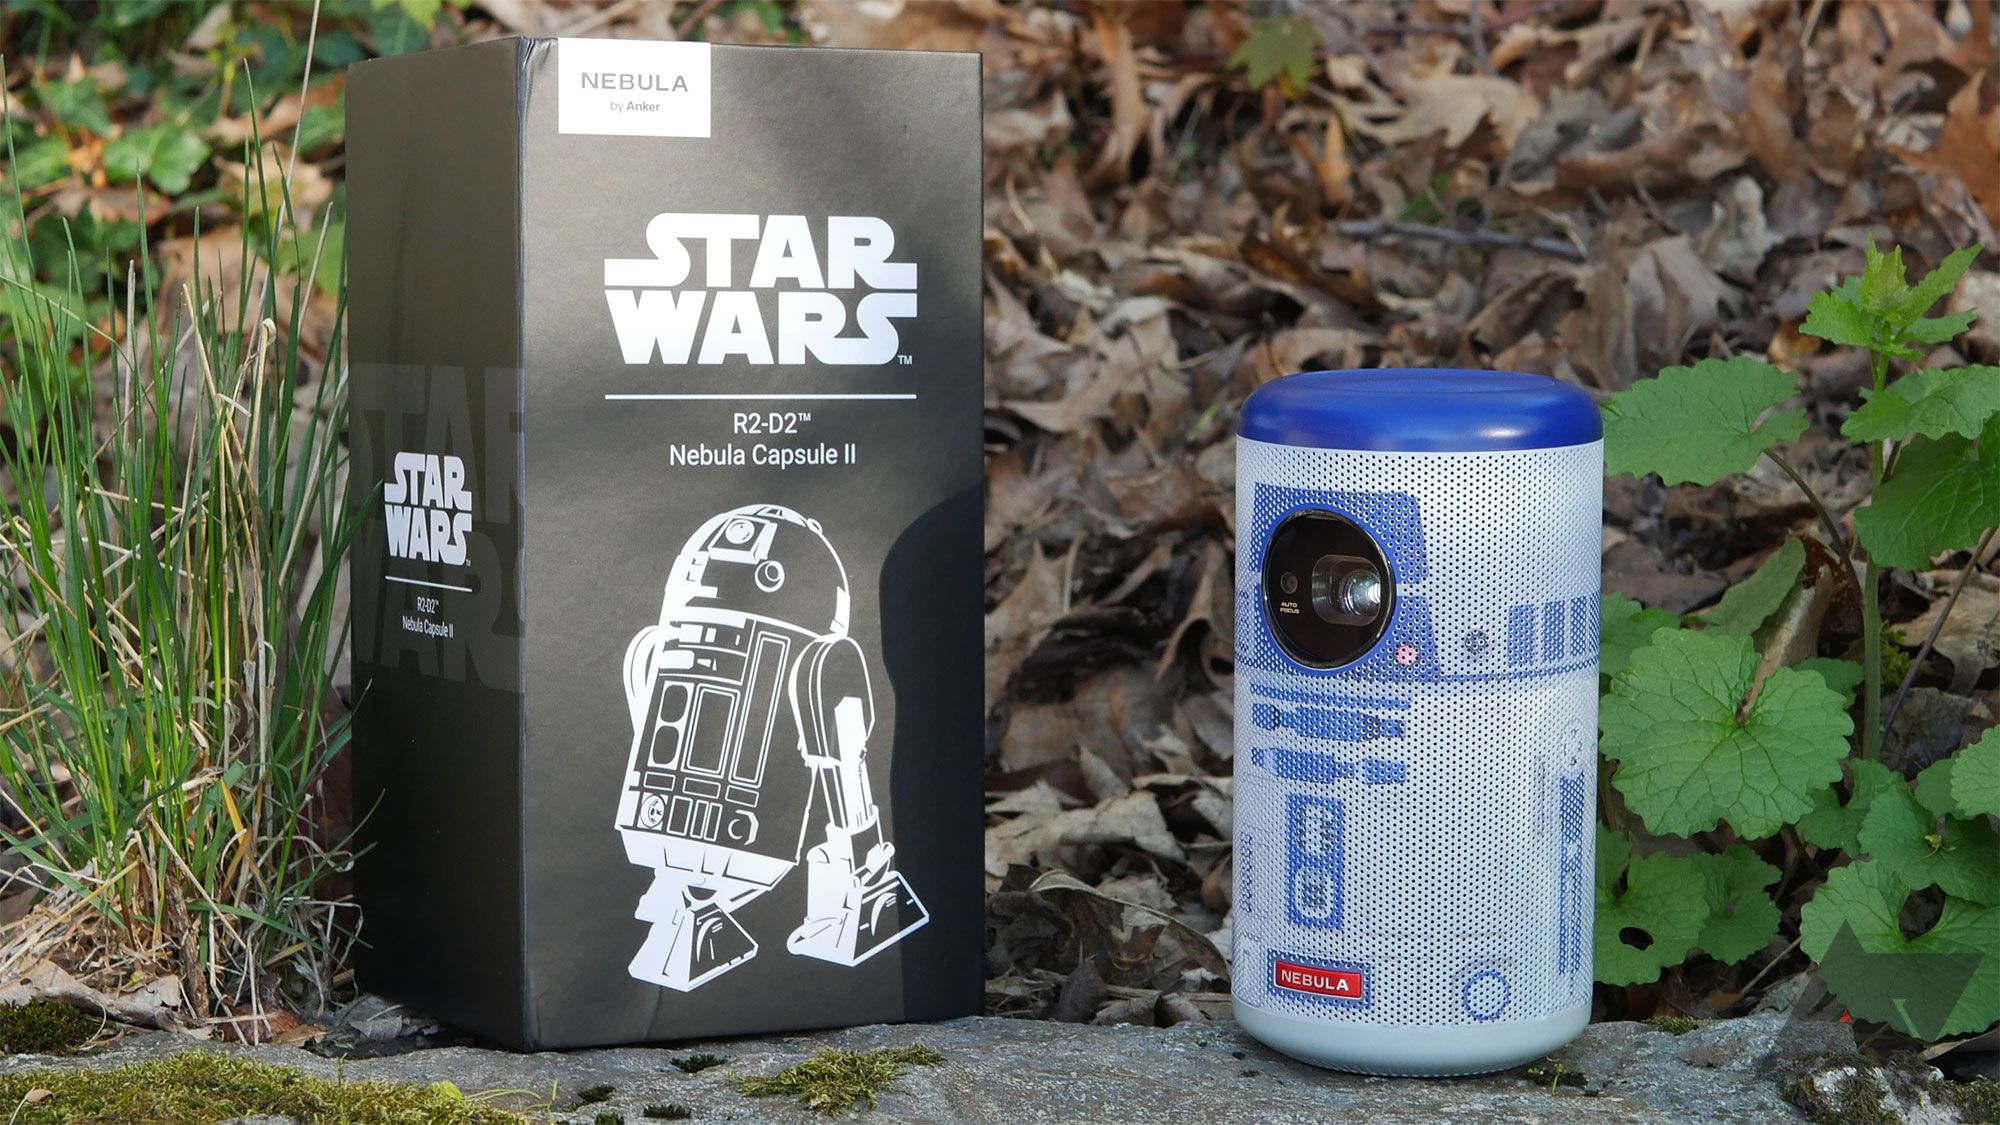 I've been flying co-pilot with Anker's new R2-D2 projector, but 